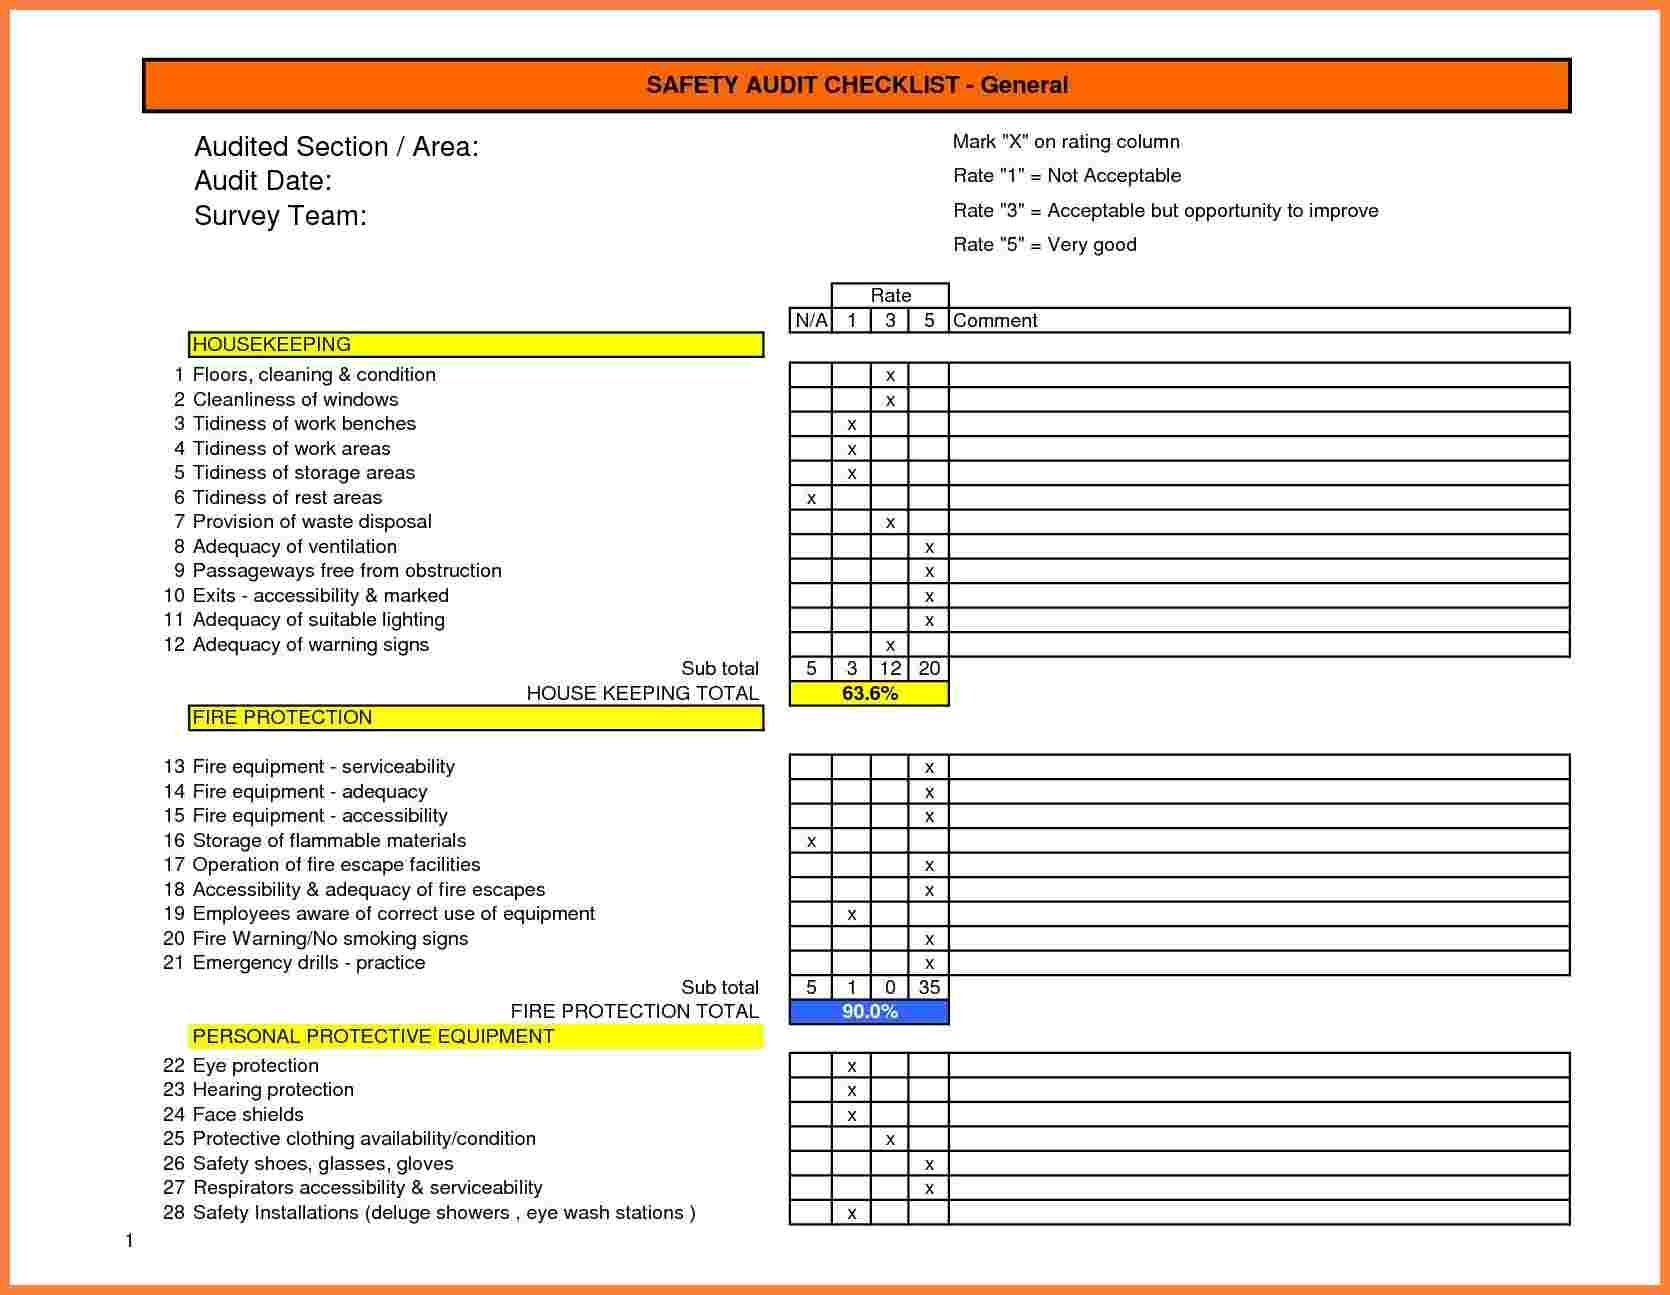 template : Image Result For Warehouse Health And Safety Audit Form  Intended For Warehouse Safety Inspection Checklist Template Within Warehouse Safety Inspection Checklist Template